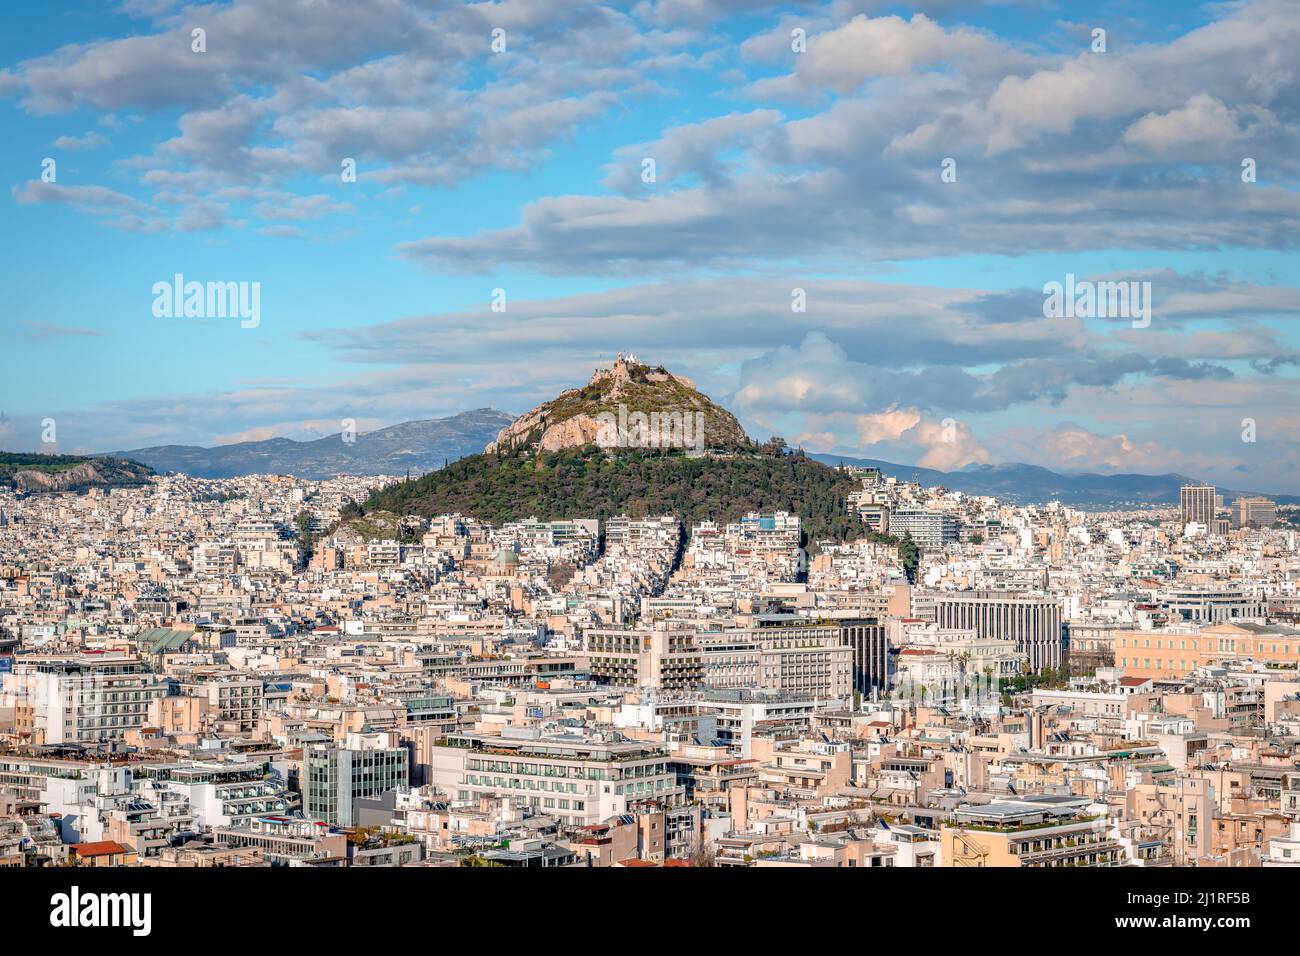 Panorama of the Athens' skyline with the Lycabettus Mount. Photo taken from the Acropolis hill. Stock Photo